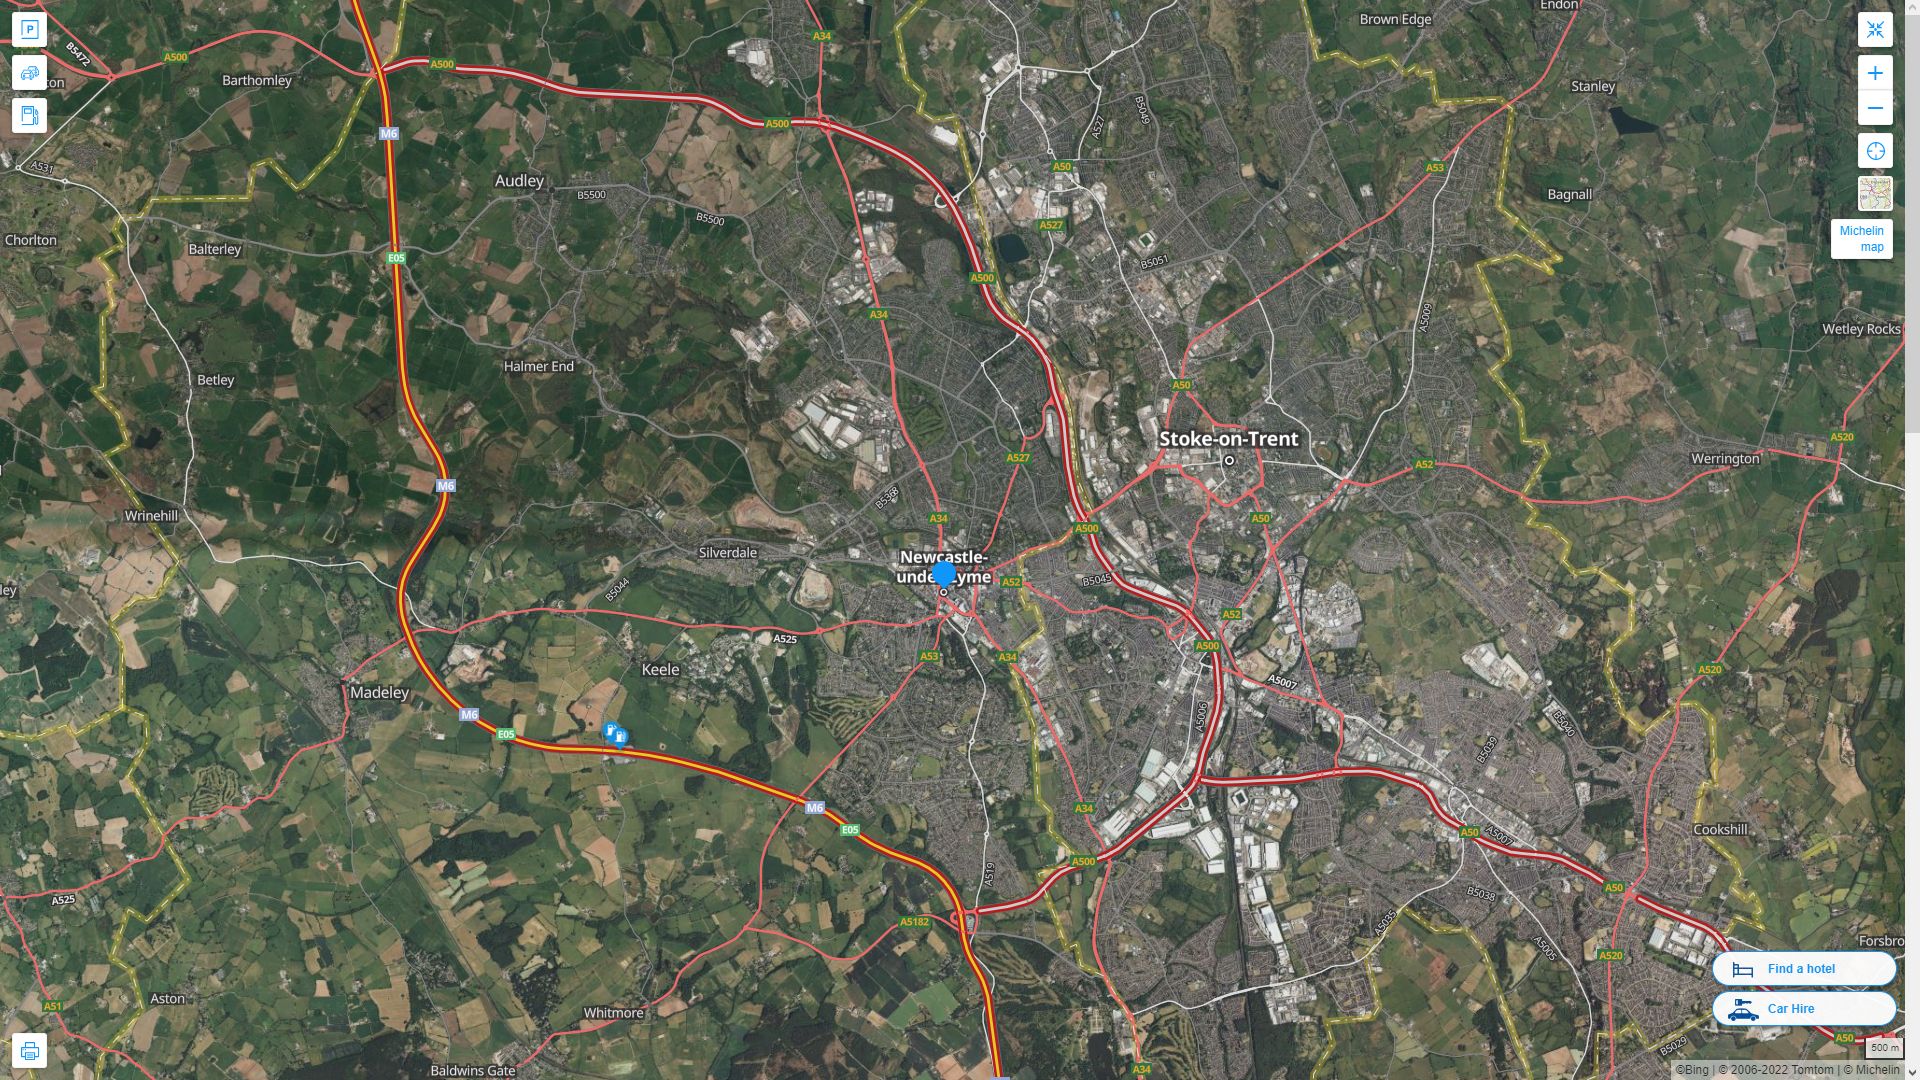 Newcastle under Lyme Highway and Road Map with Satellite View